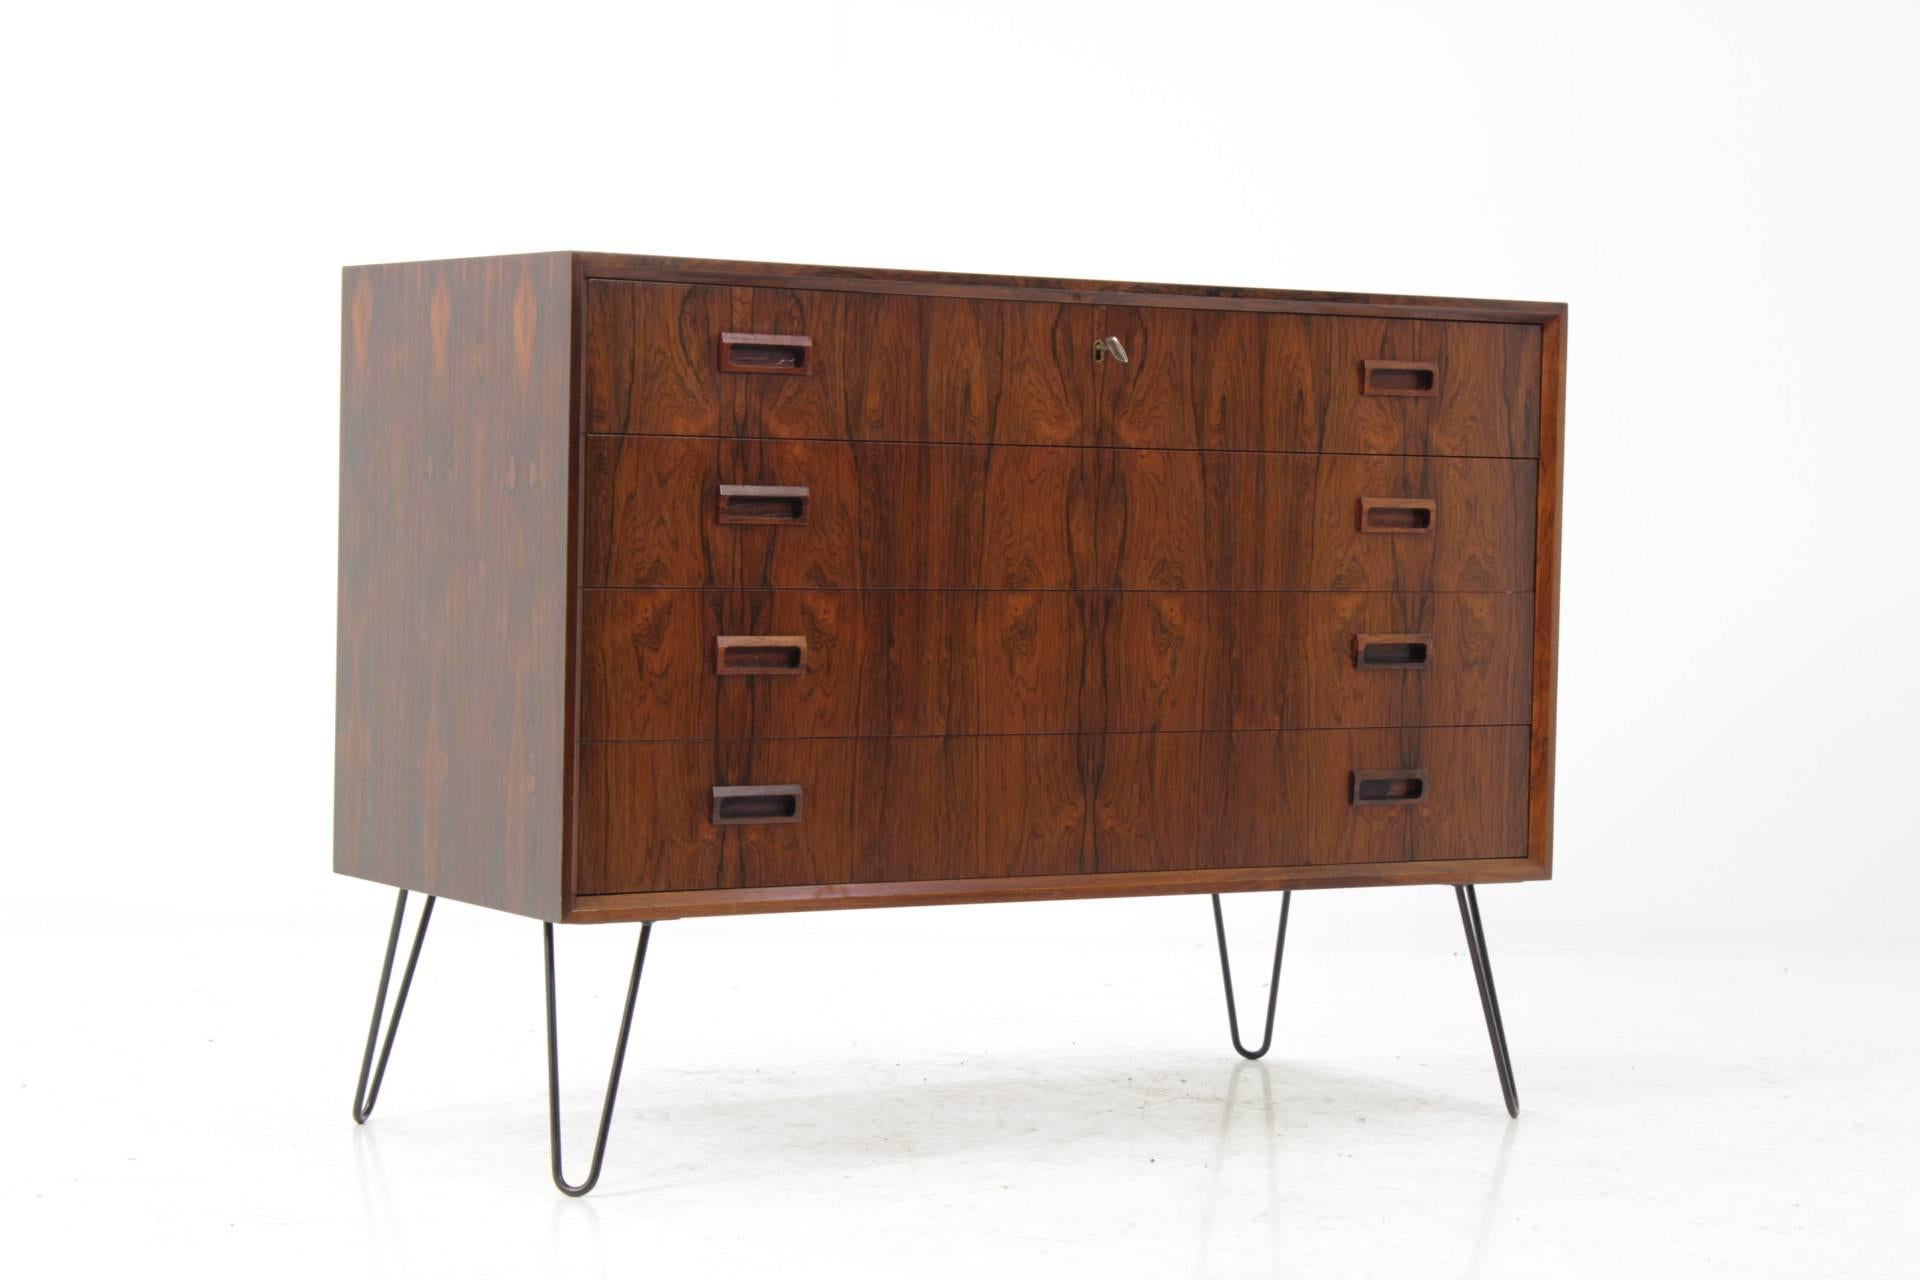 This commode features four drawers. The hairpin iron legs were added afterwards. The item was carefully restored.